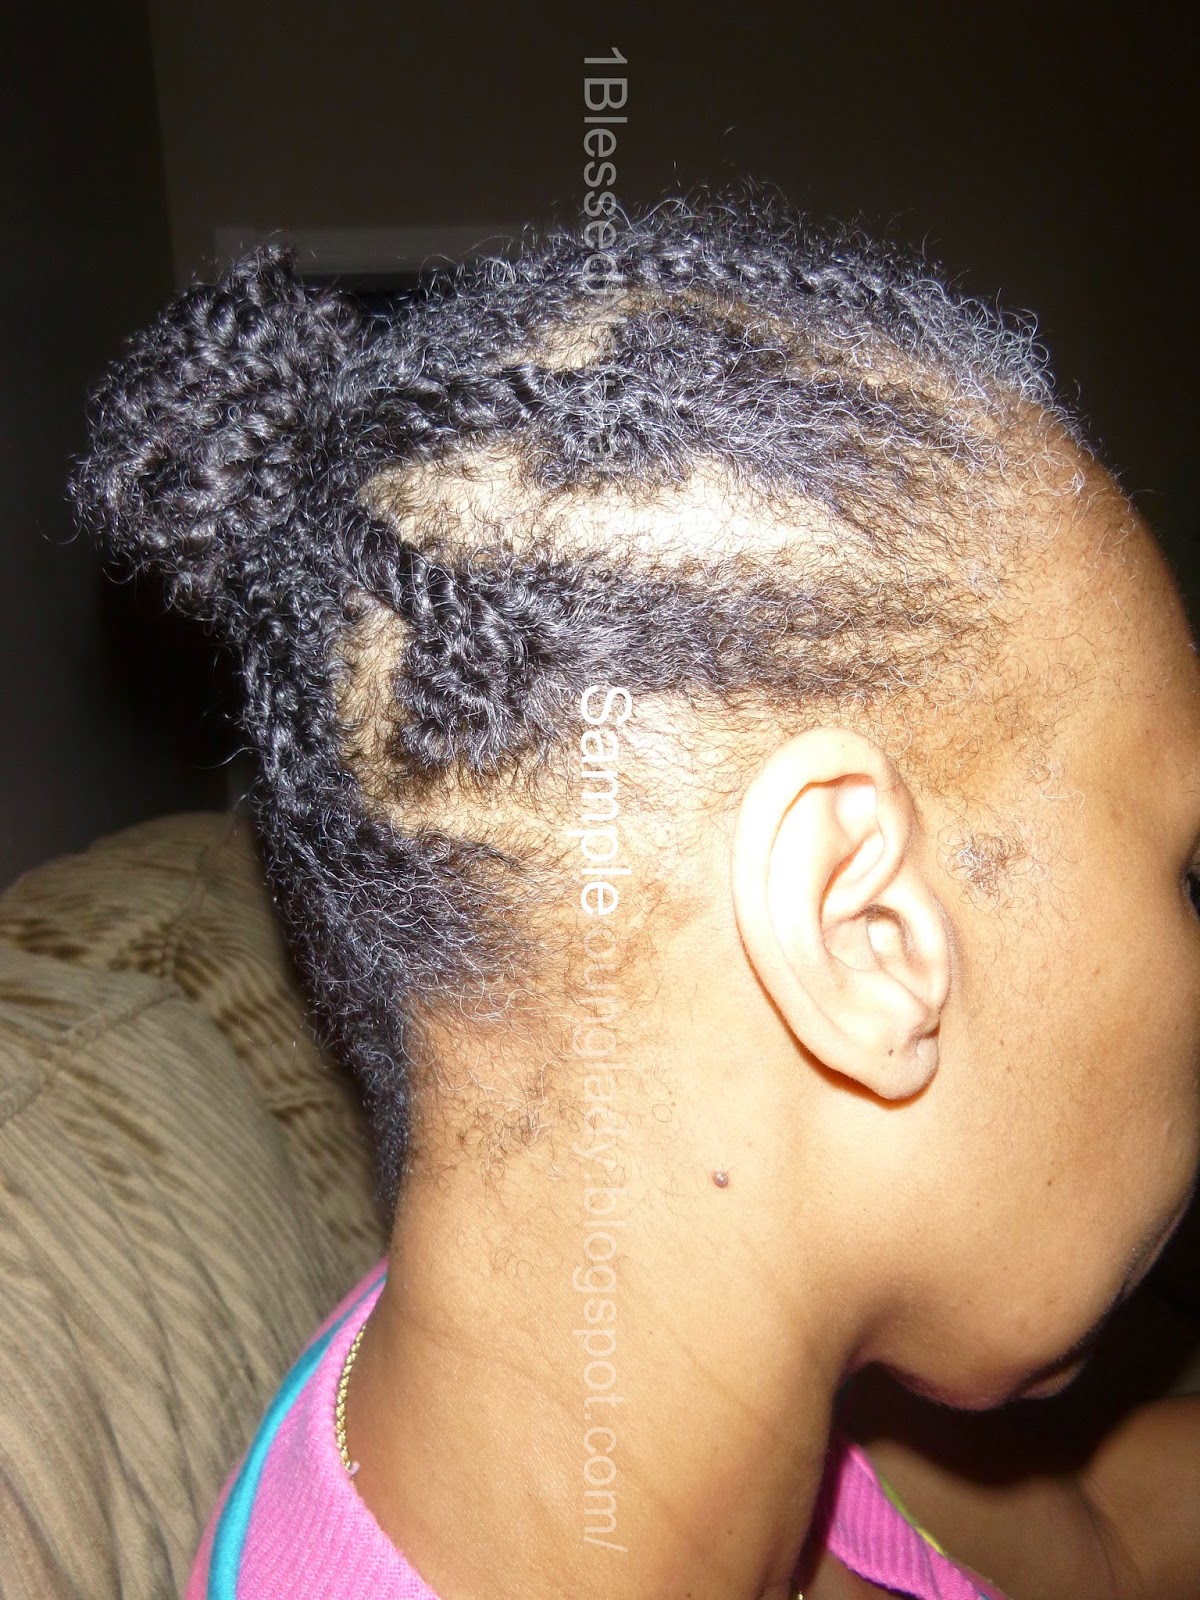 Natural Treatments For Alopecia - Here Are Your Options